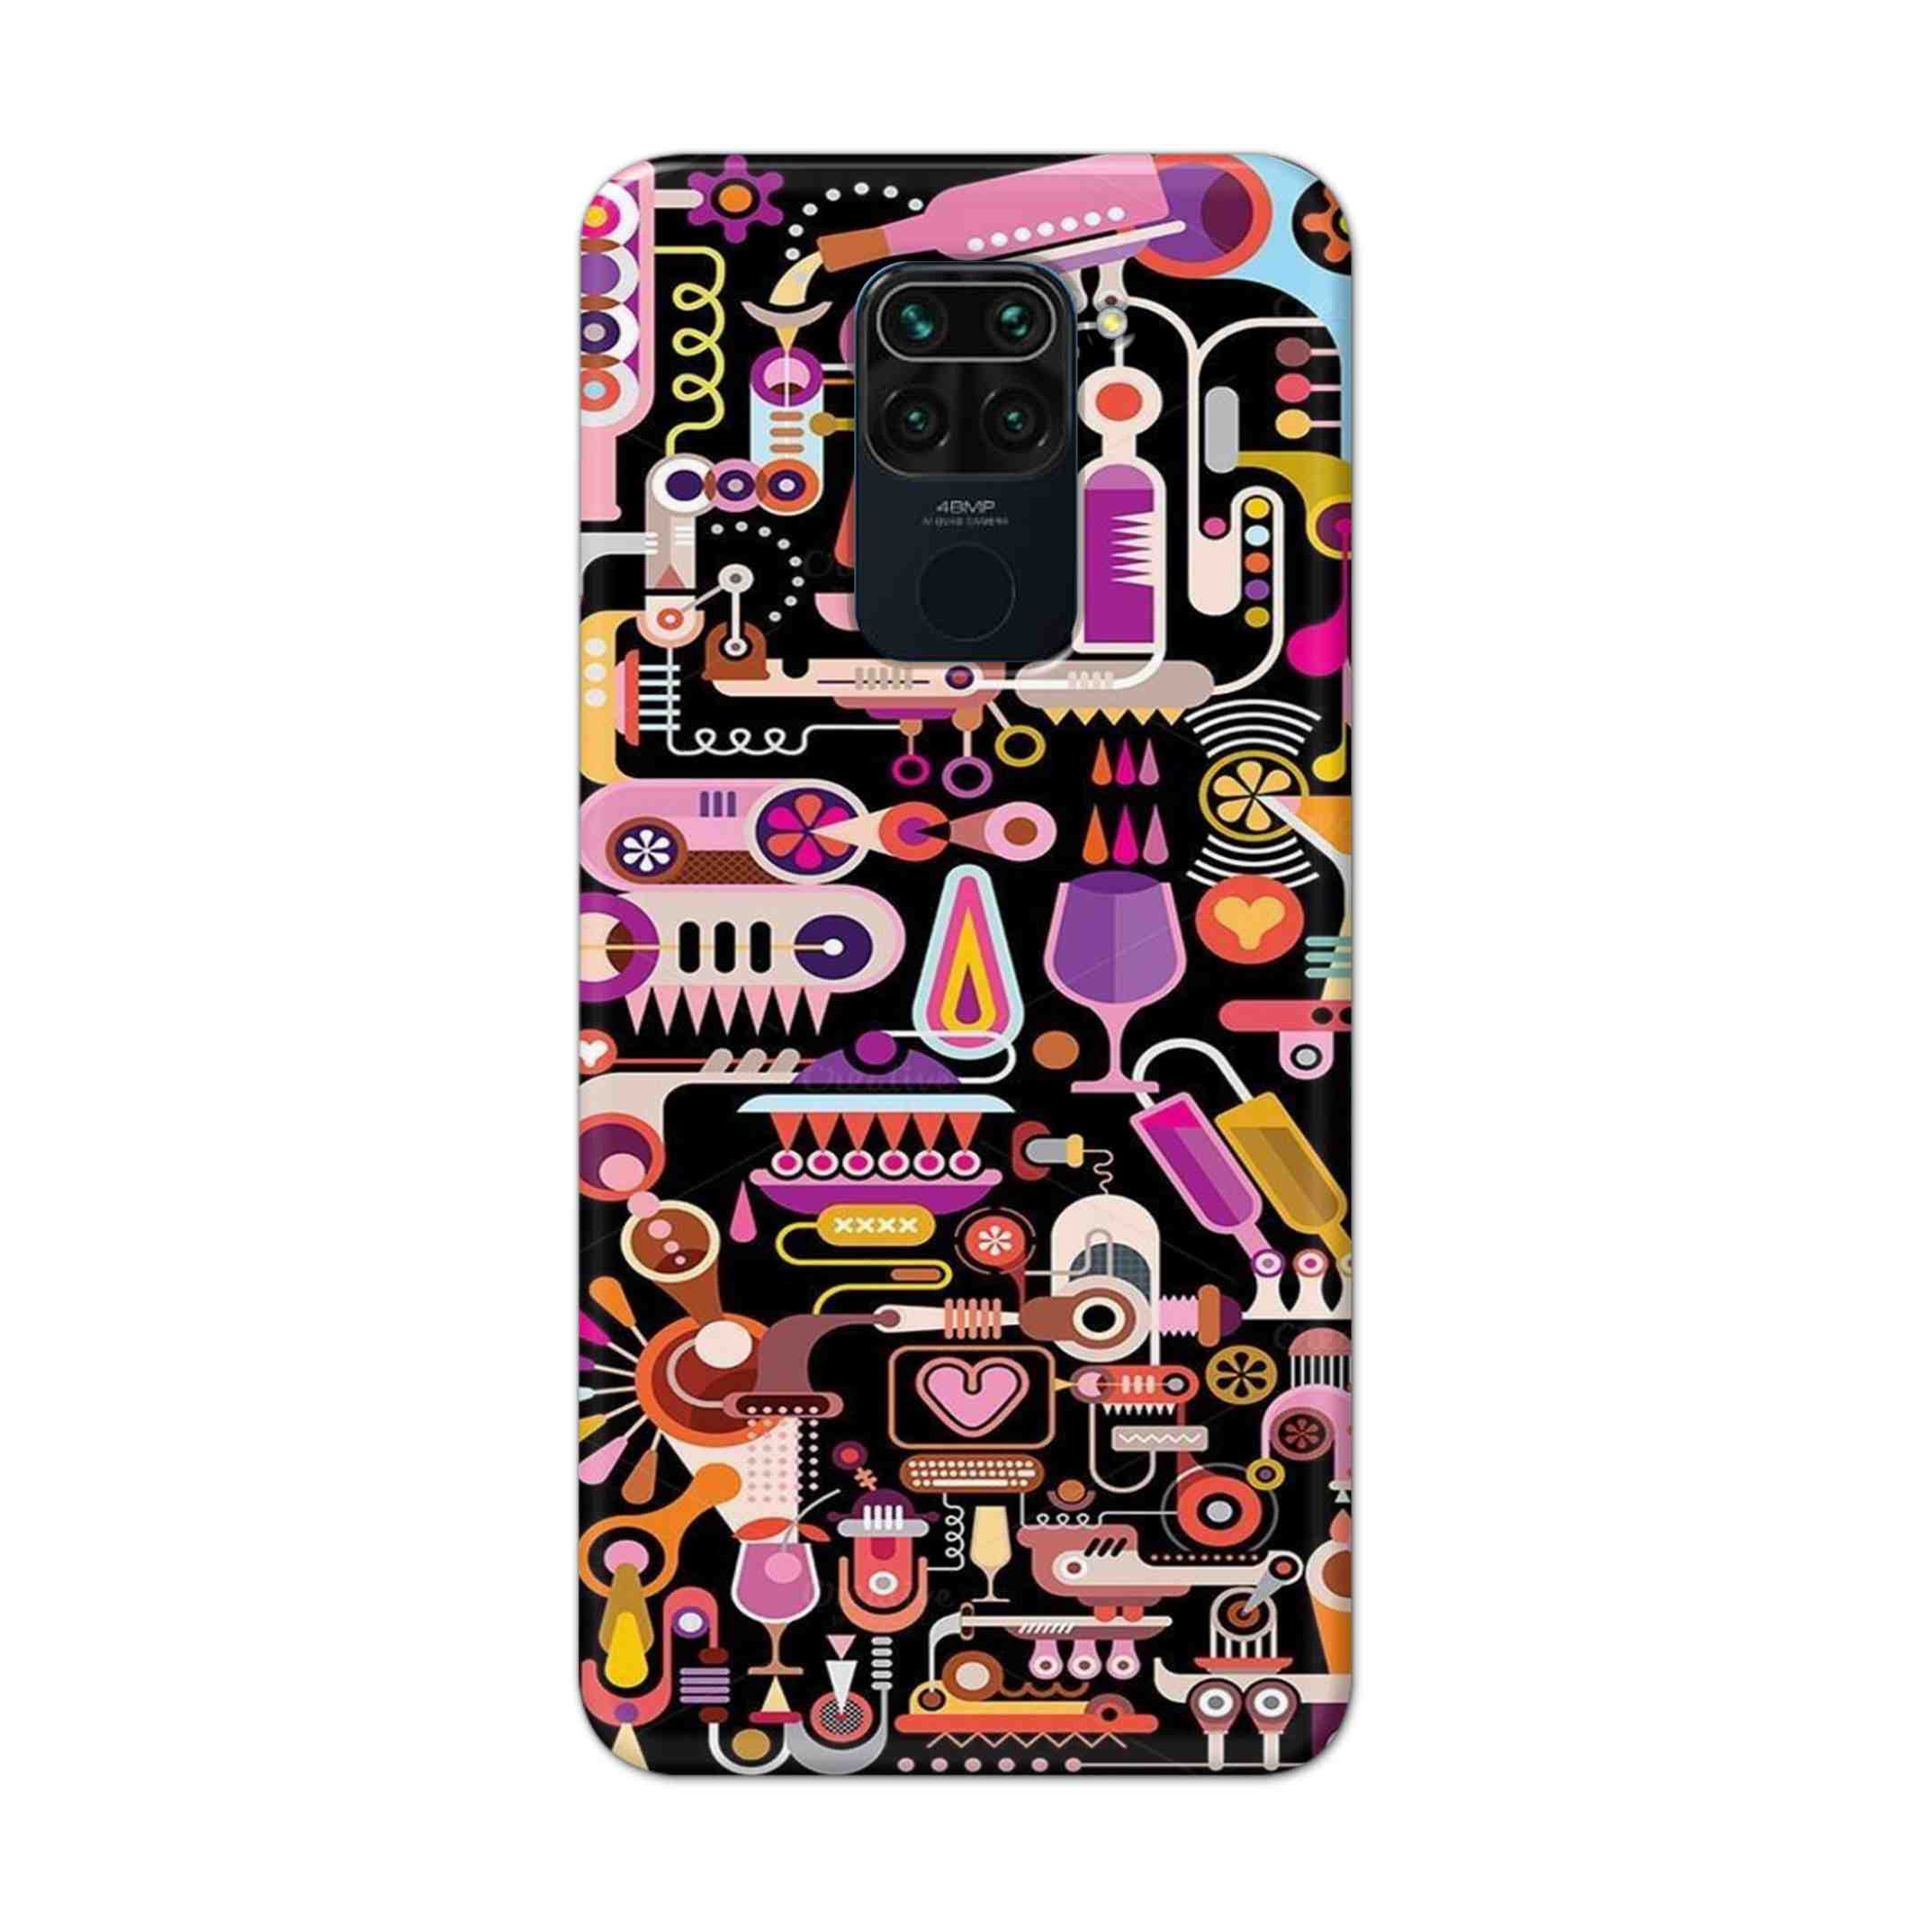 Buy Lab Art Hard Back Mobile Phone Case Cover For Xiaomi Redmi Note 9 Online